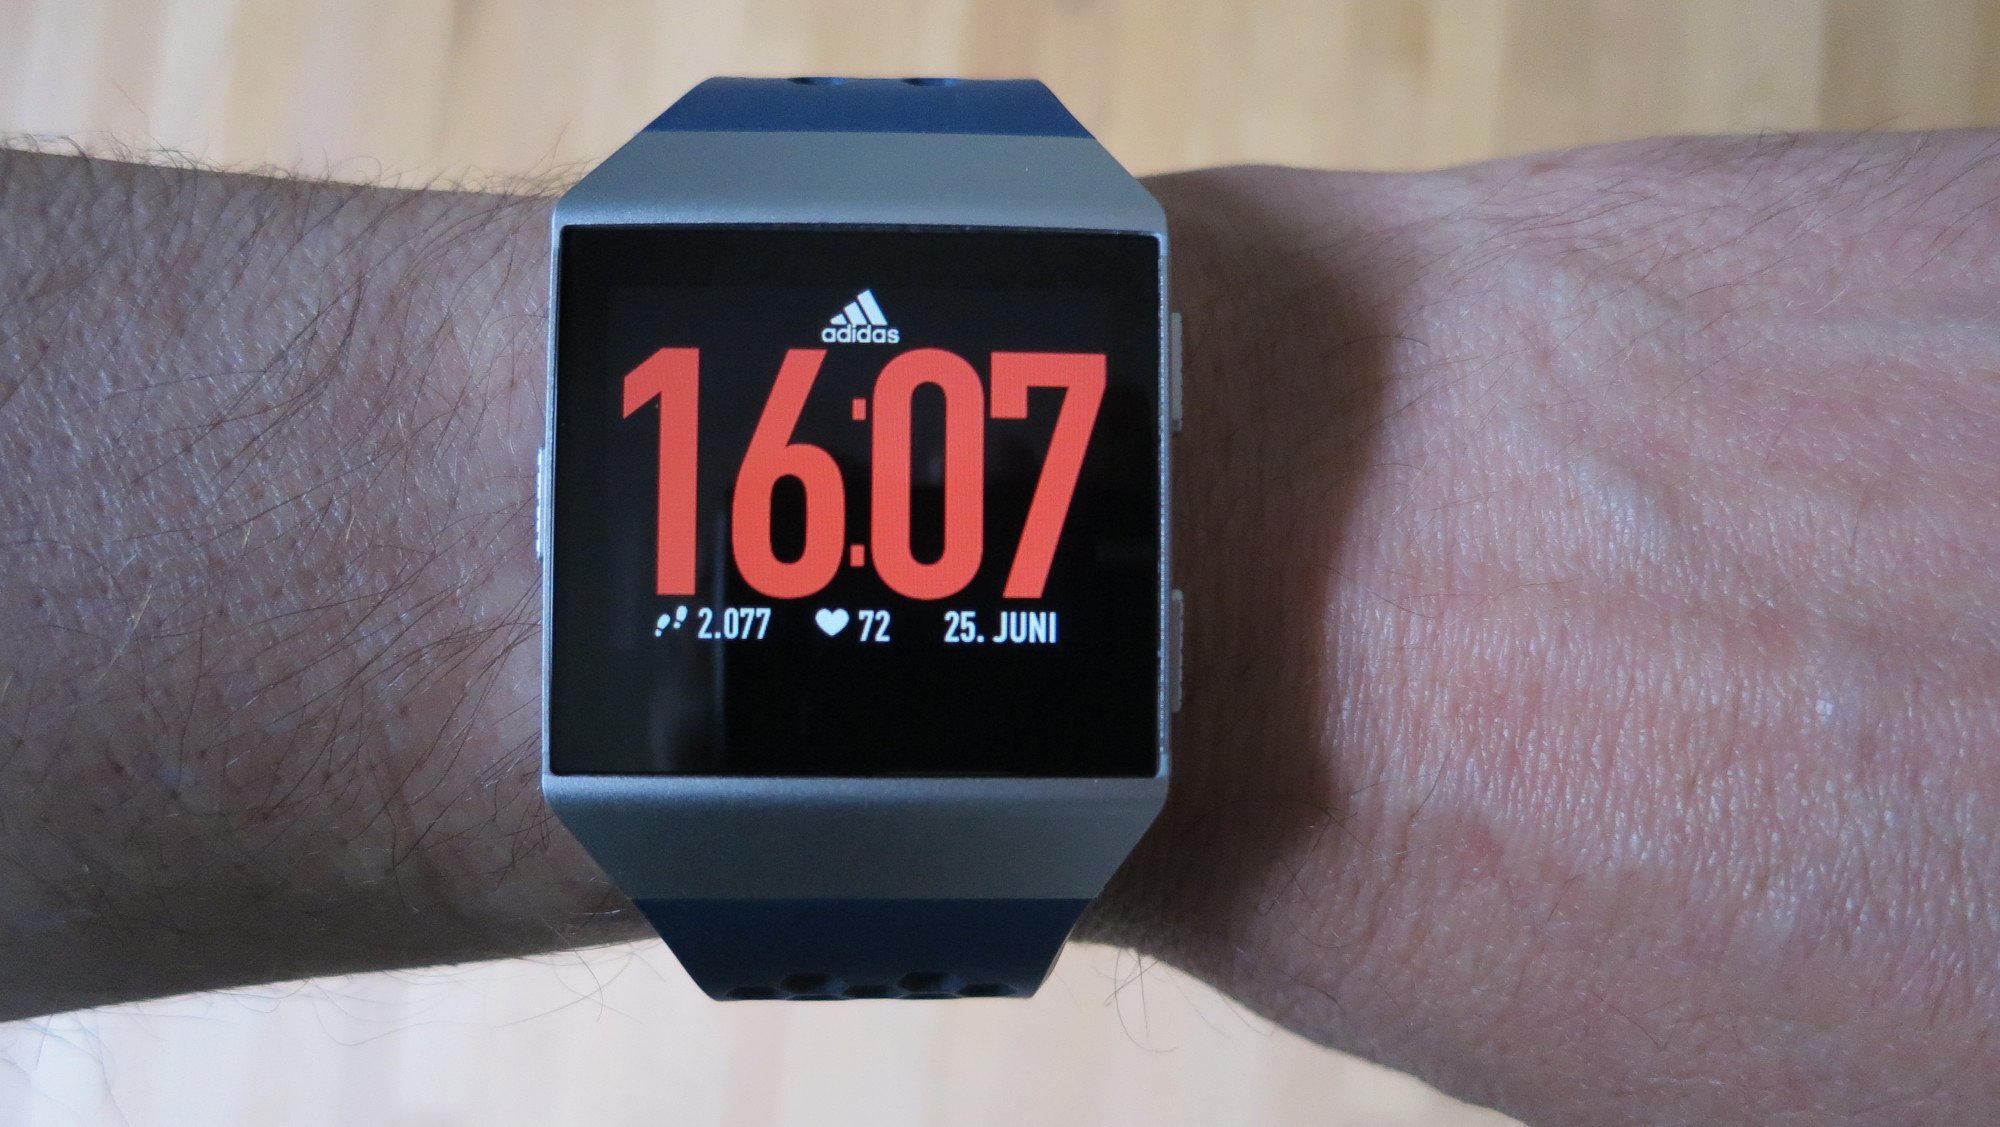 fitbit ionic adidas edition watch